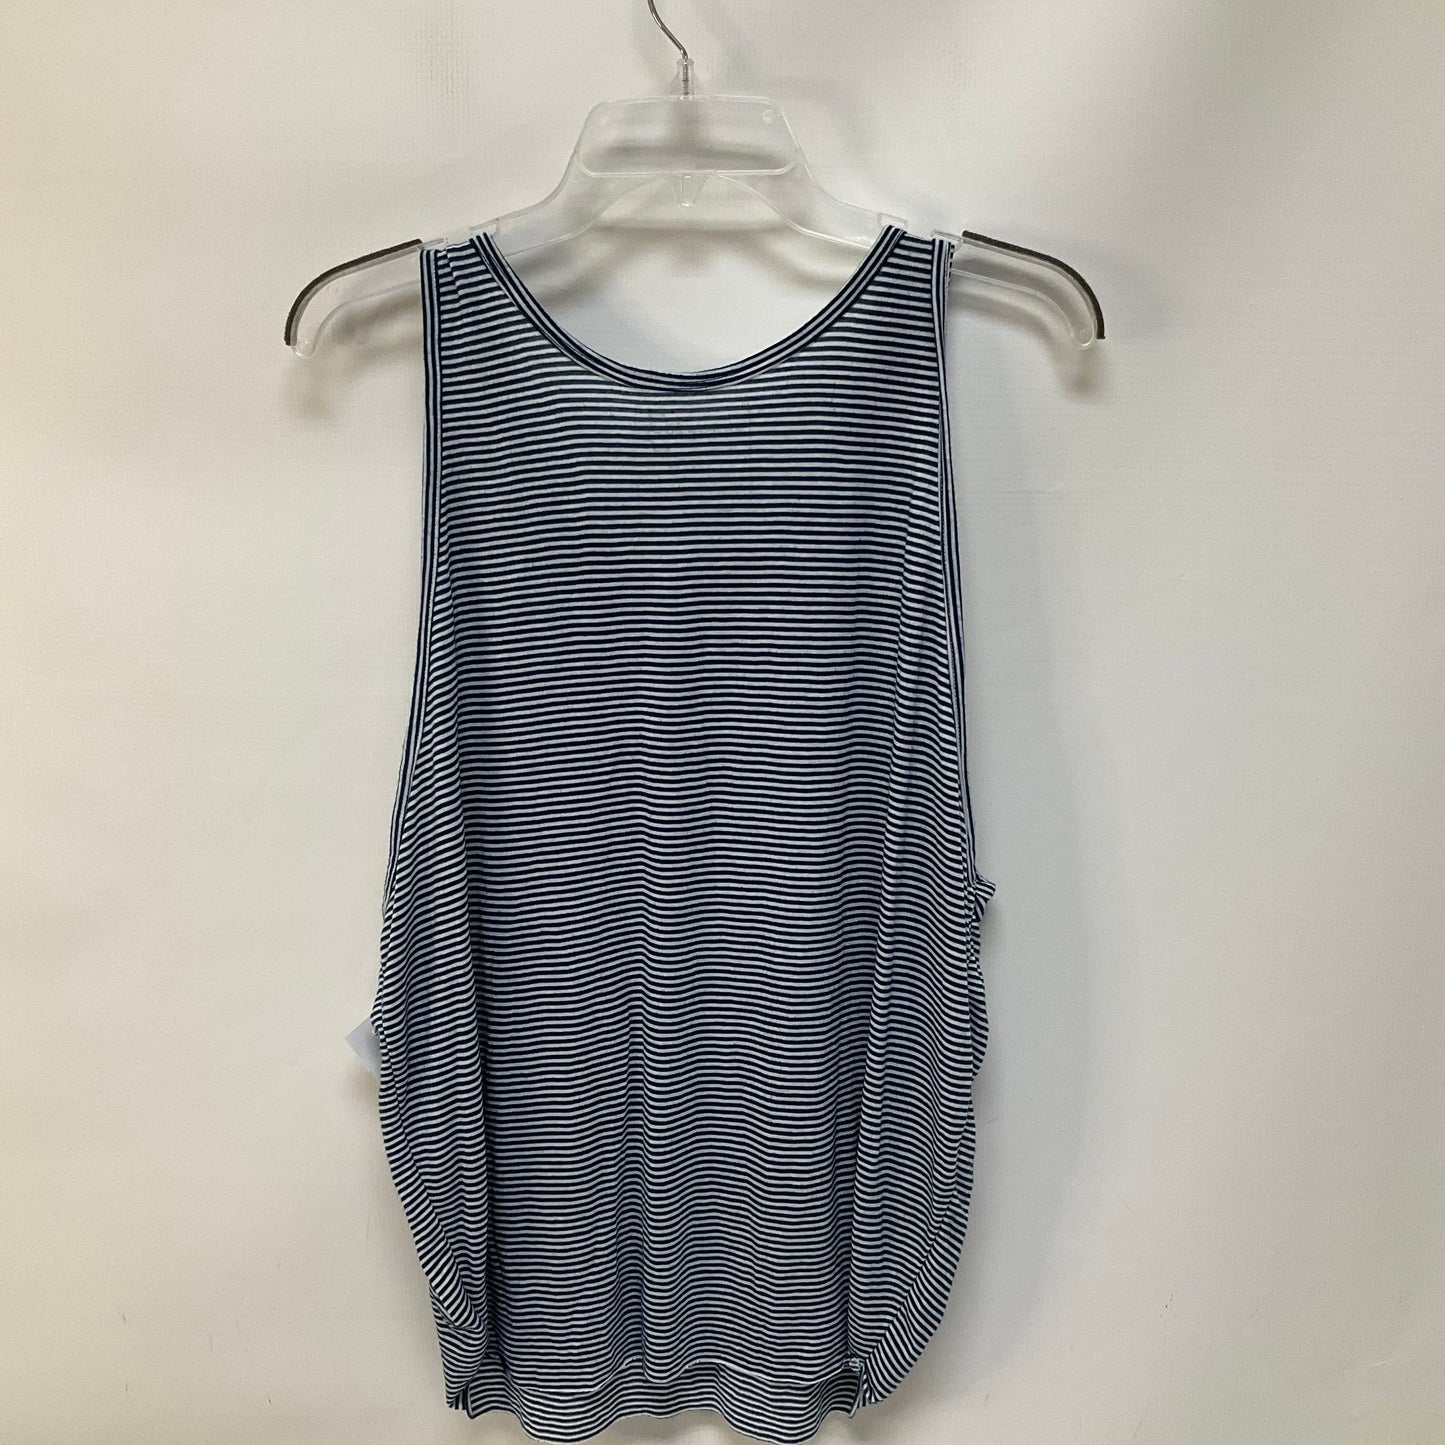 Striped Pattern Top Sleeveless We The Free, Size M